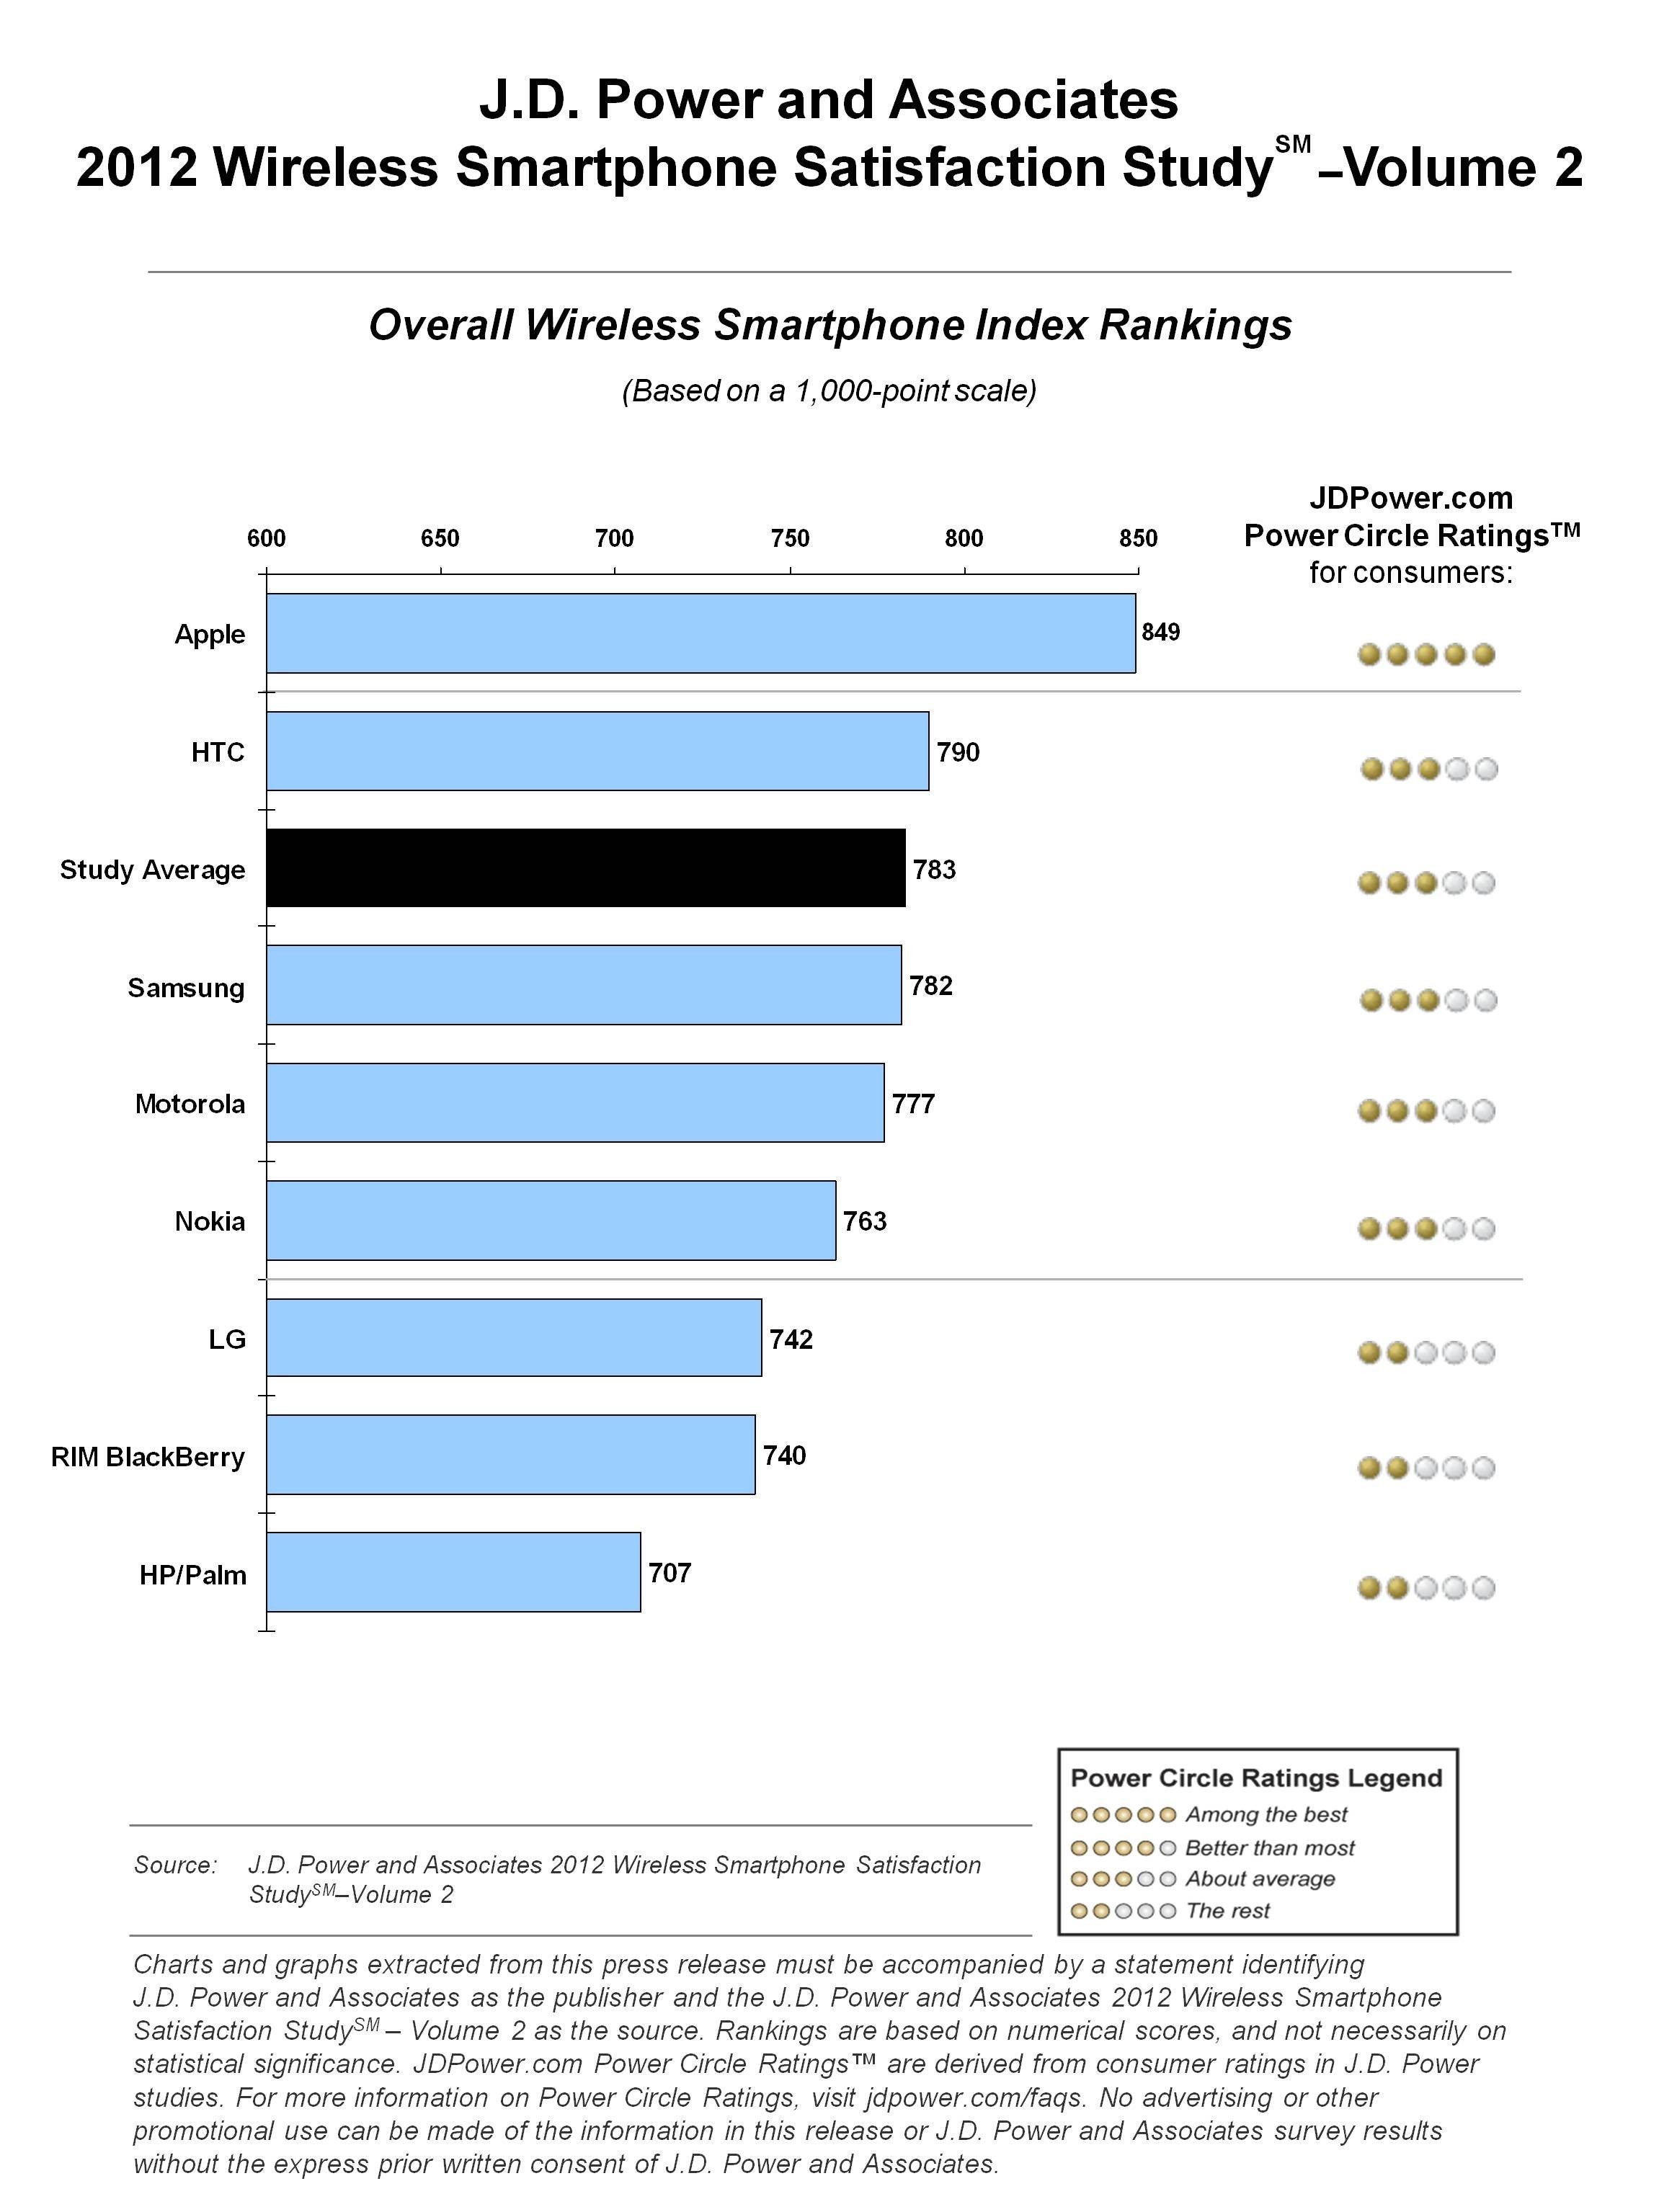 Apple once again comes out on top of customer satisfaction survey, Nokia oddly low